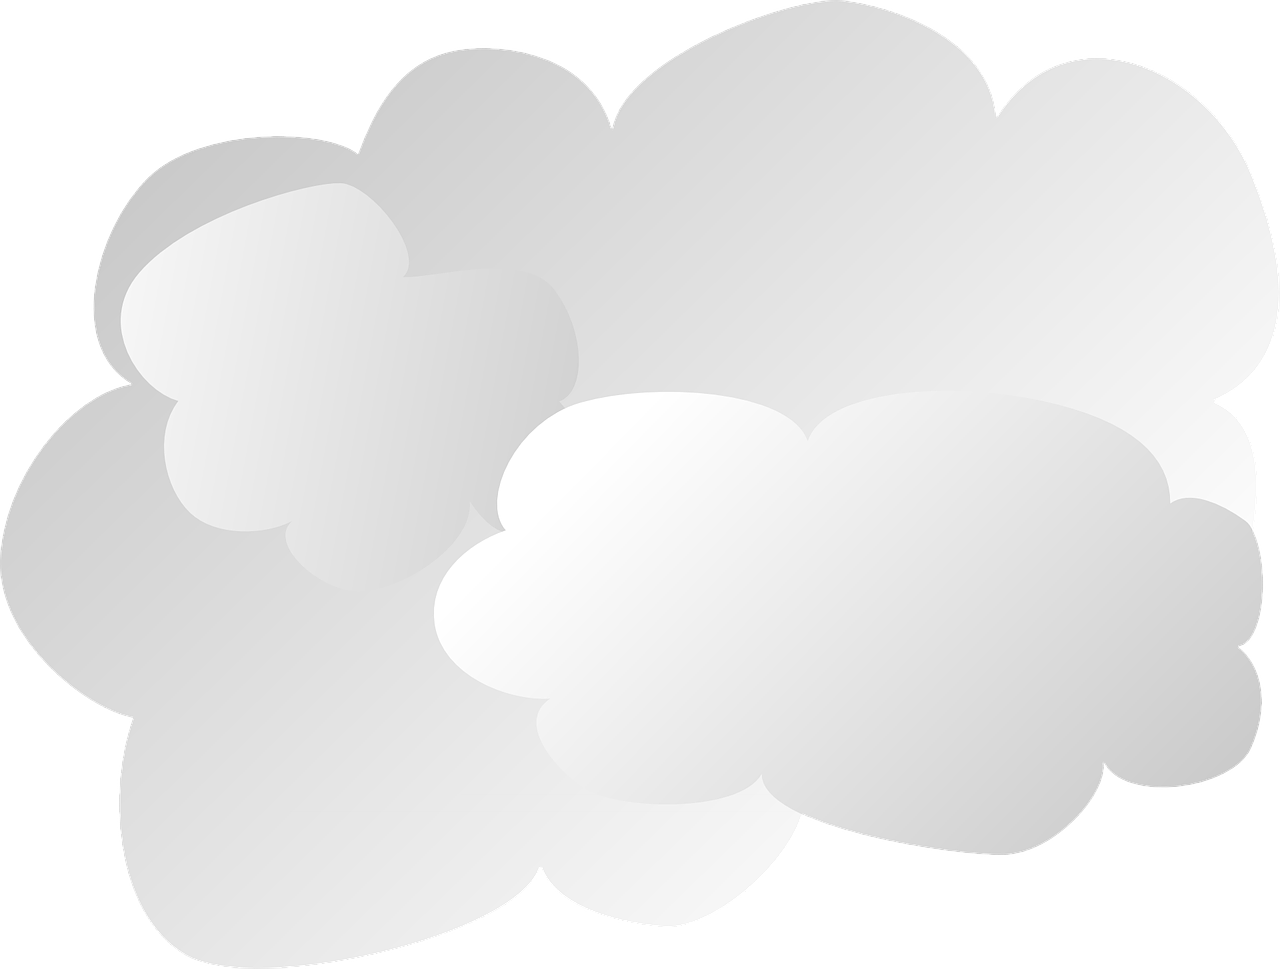 cloud,sky,white,nature,weather,light,day,environment,cloudscape,cumulus,cloudy,overcast,free vector graphics,free pictures, free photos, free images, royalty free, free illustrations, public domain